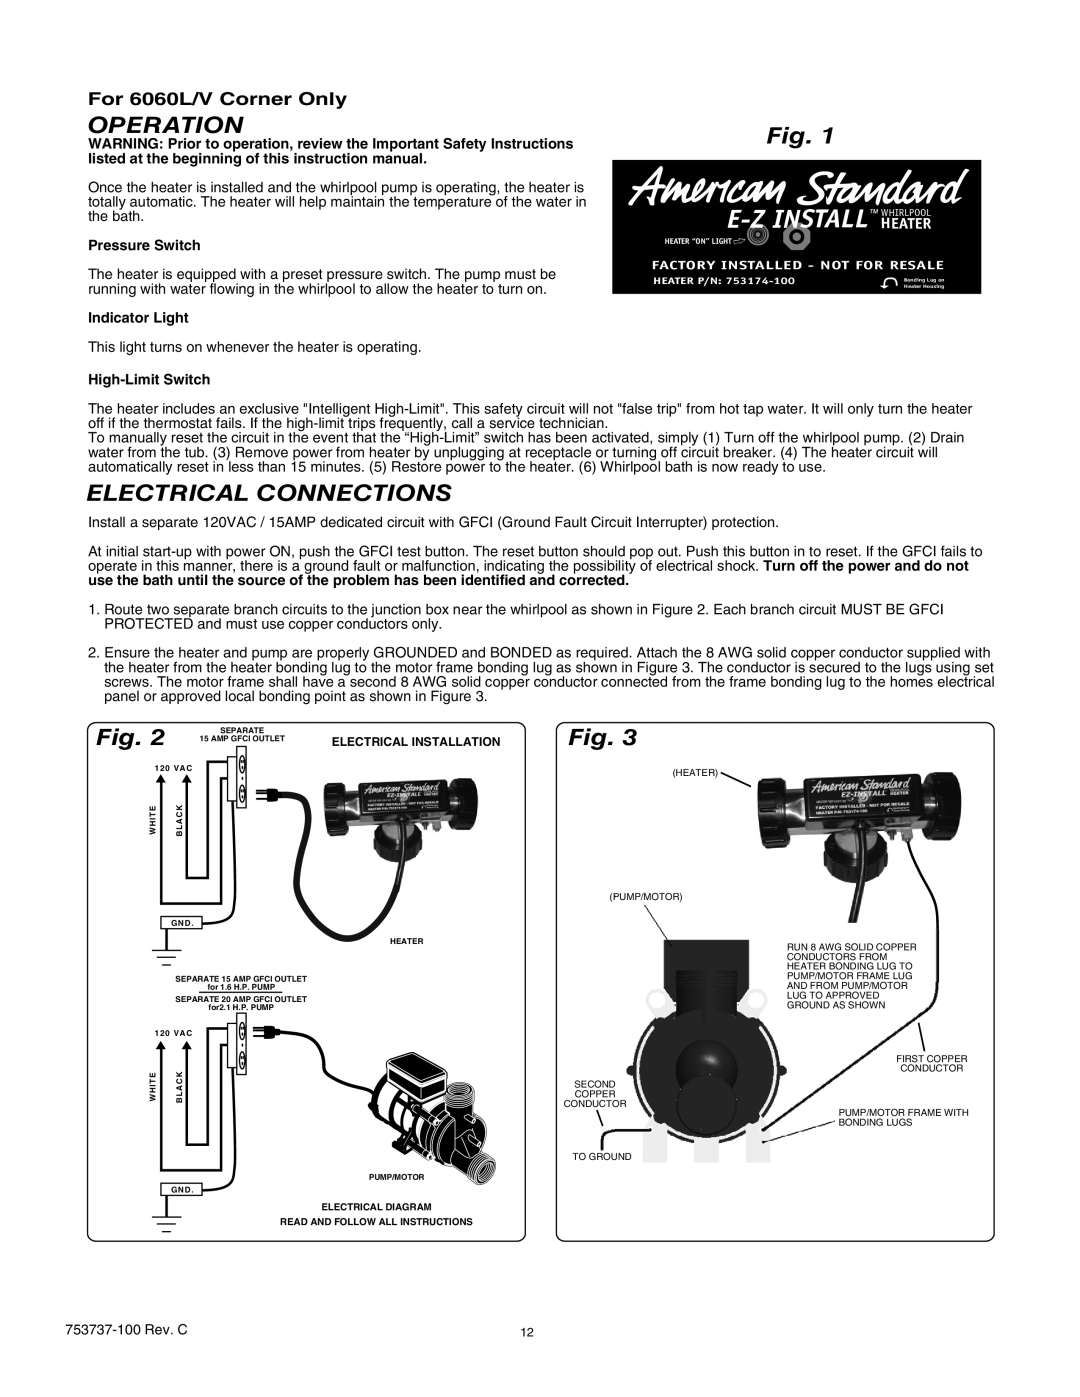 American Standard 2422VA, 2422LA, 2645L E-Z Install, Operation, Electrical Connections, Pressure Switch, Indicator Light 